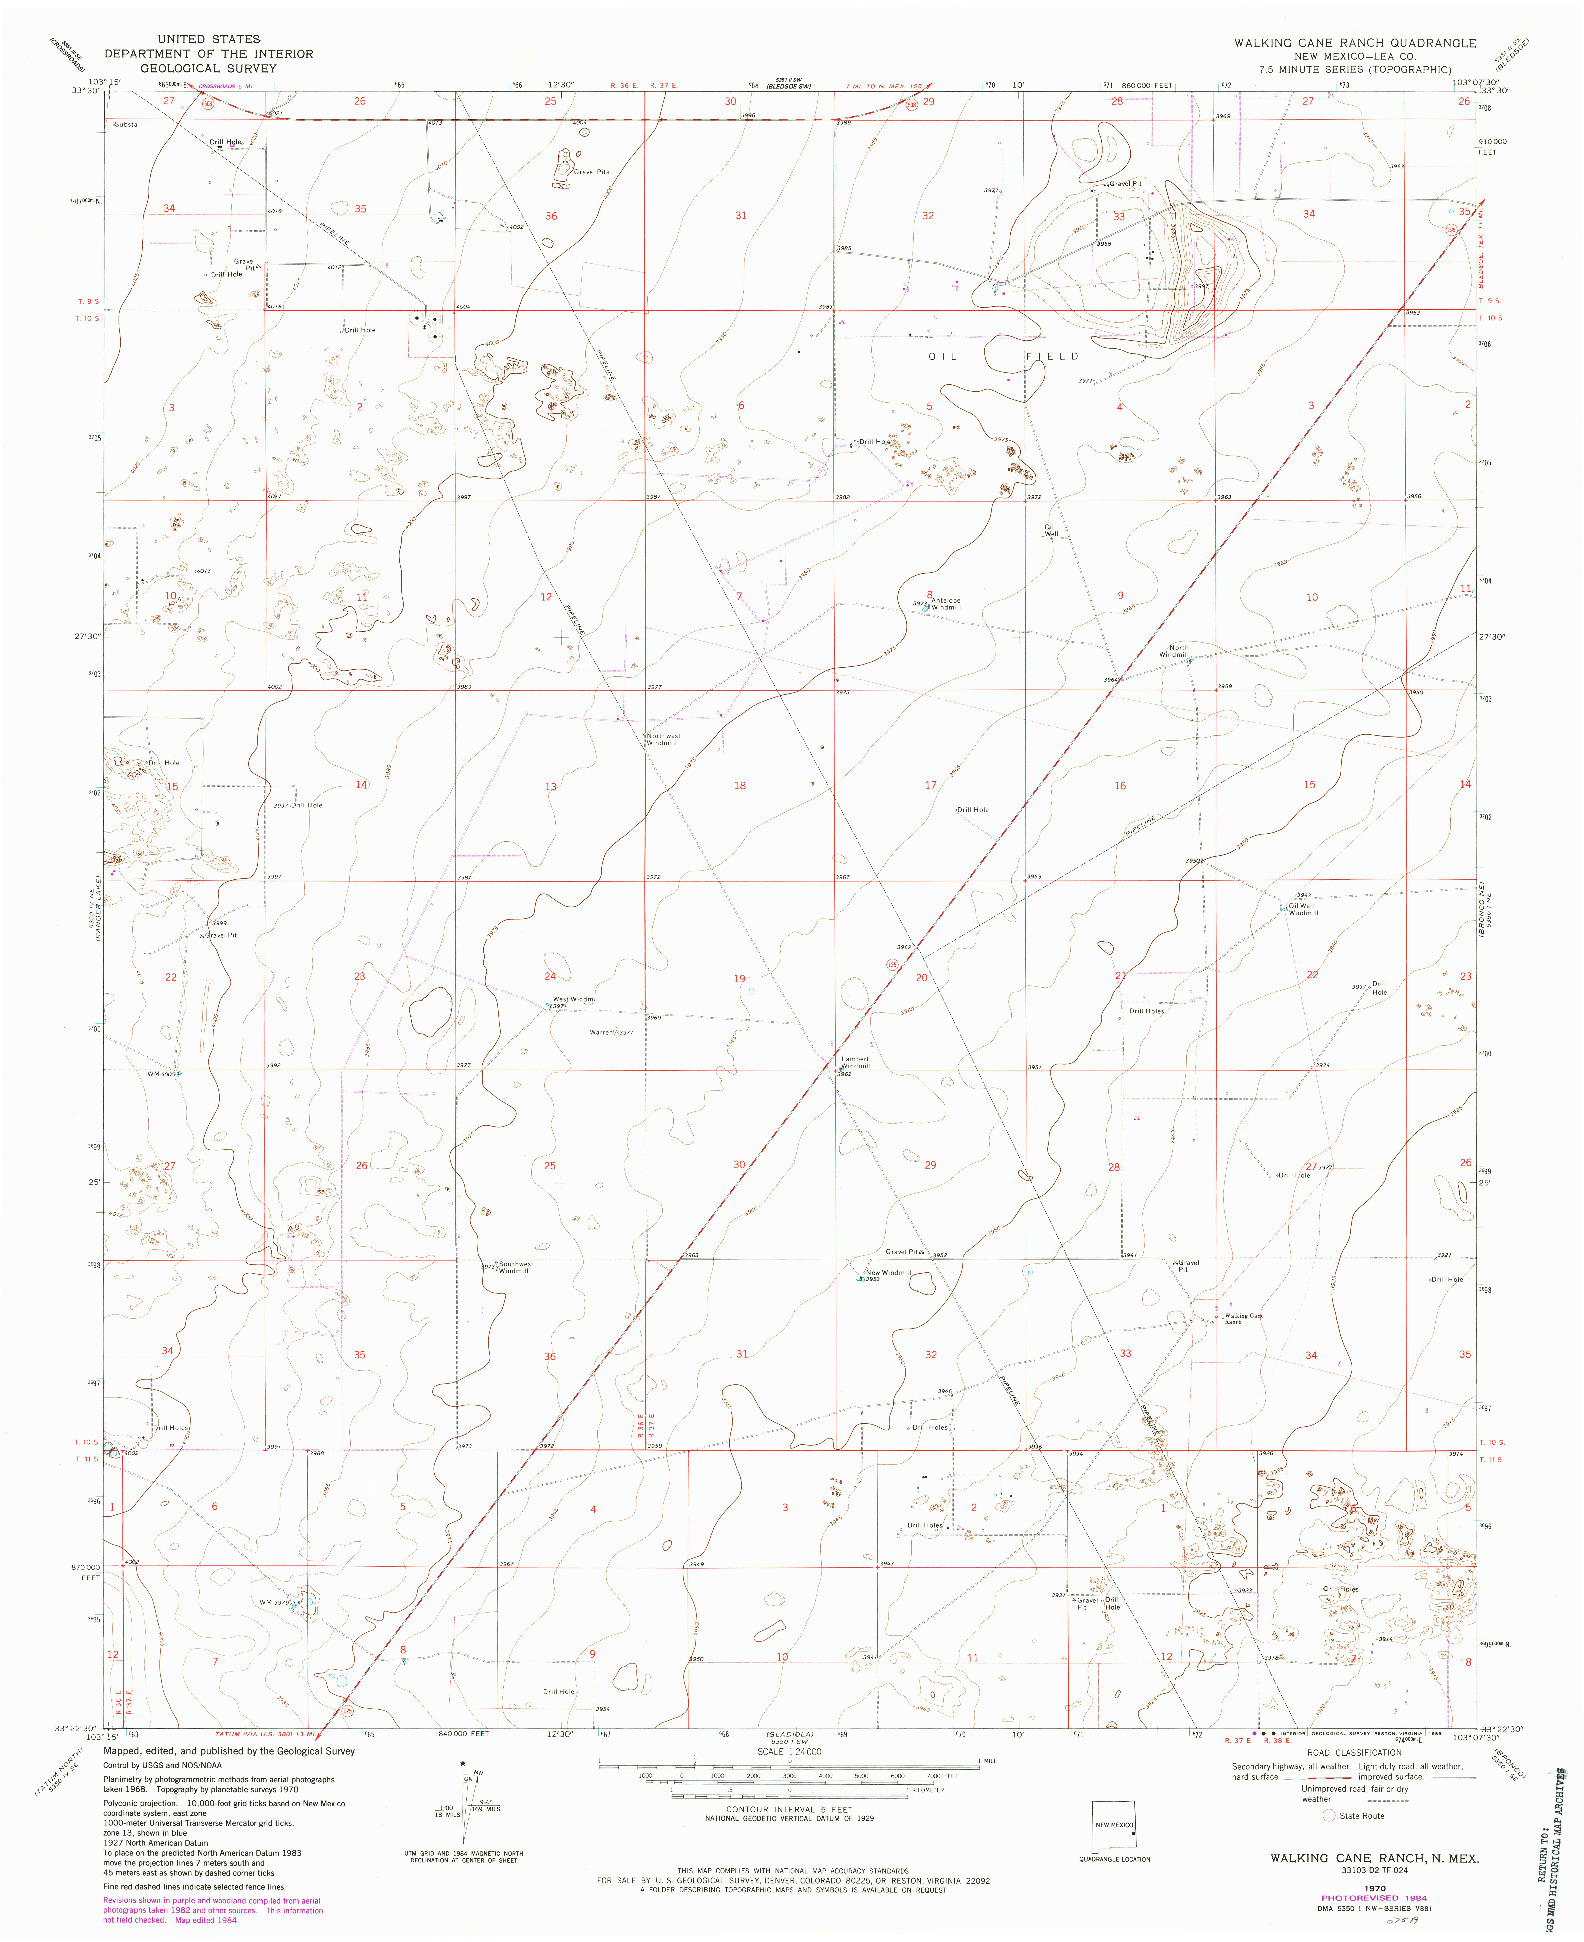 USGS 1:24000-SCALE QUADRANGLE FOR WALKING CANE RANCH, NM 1970